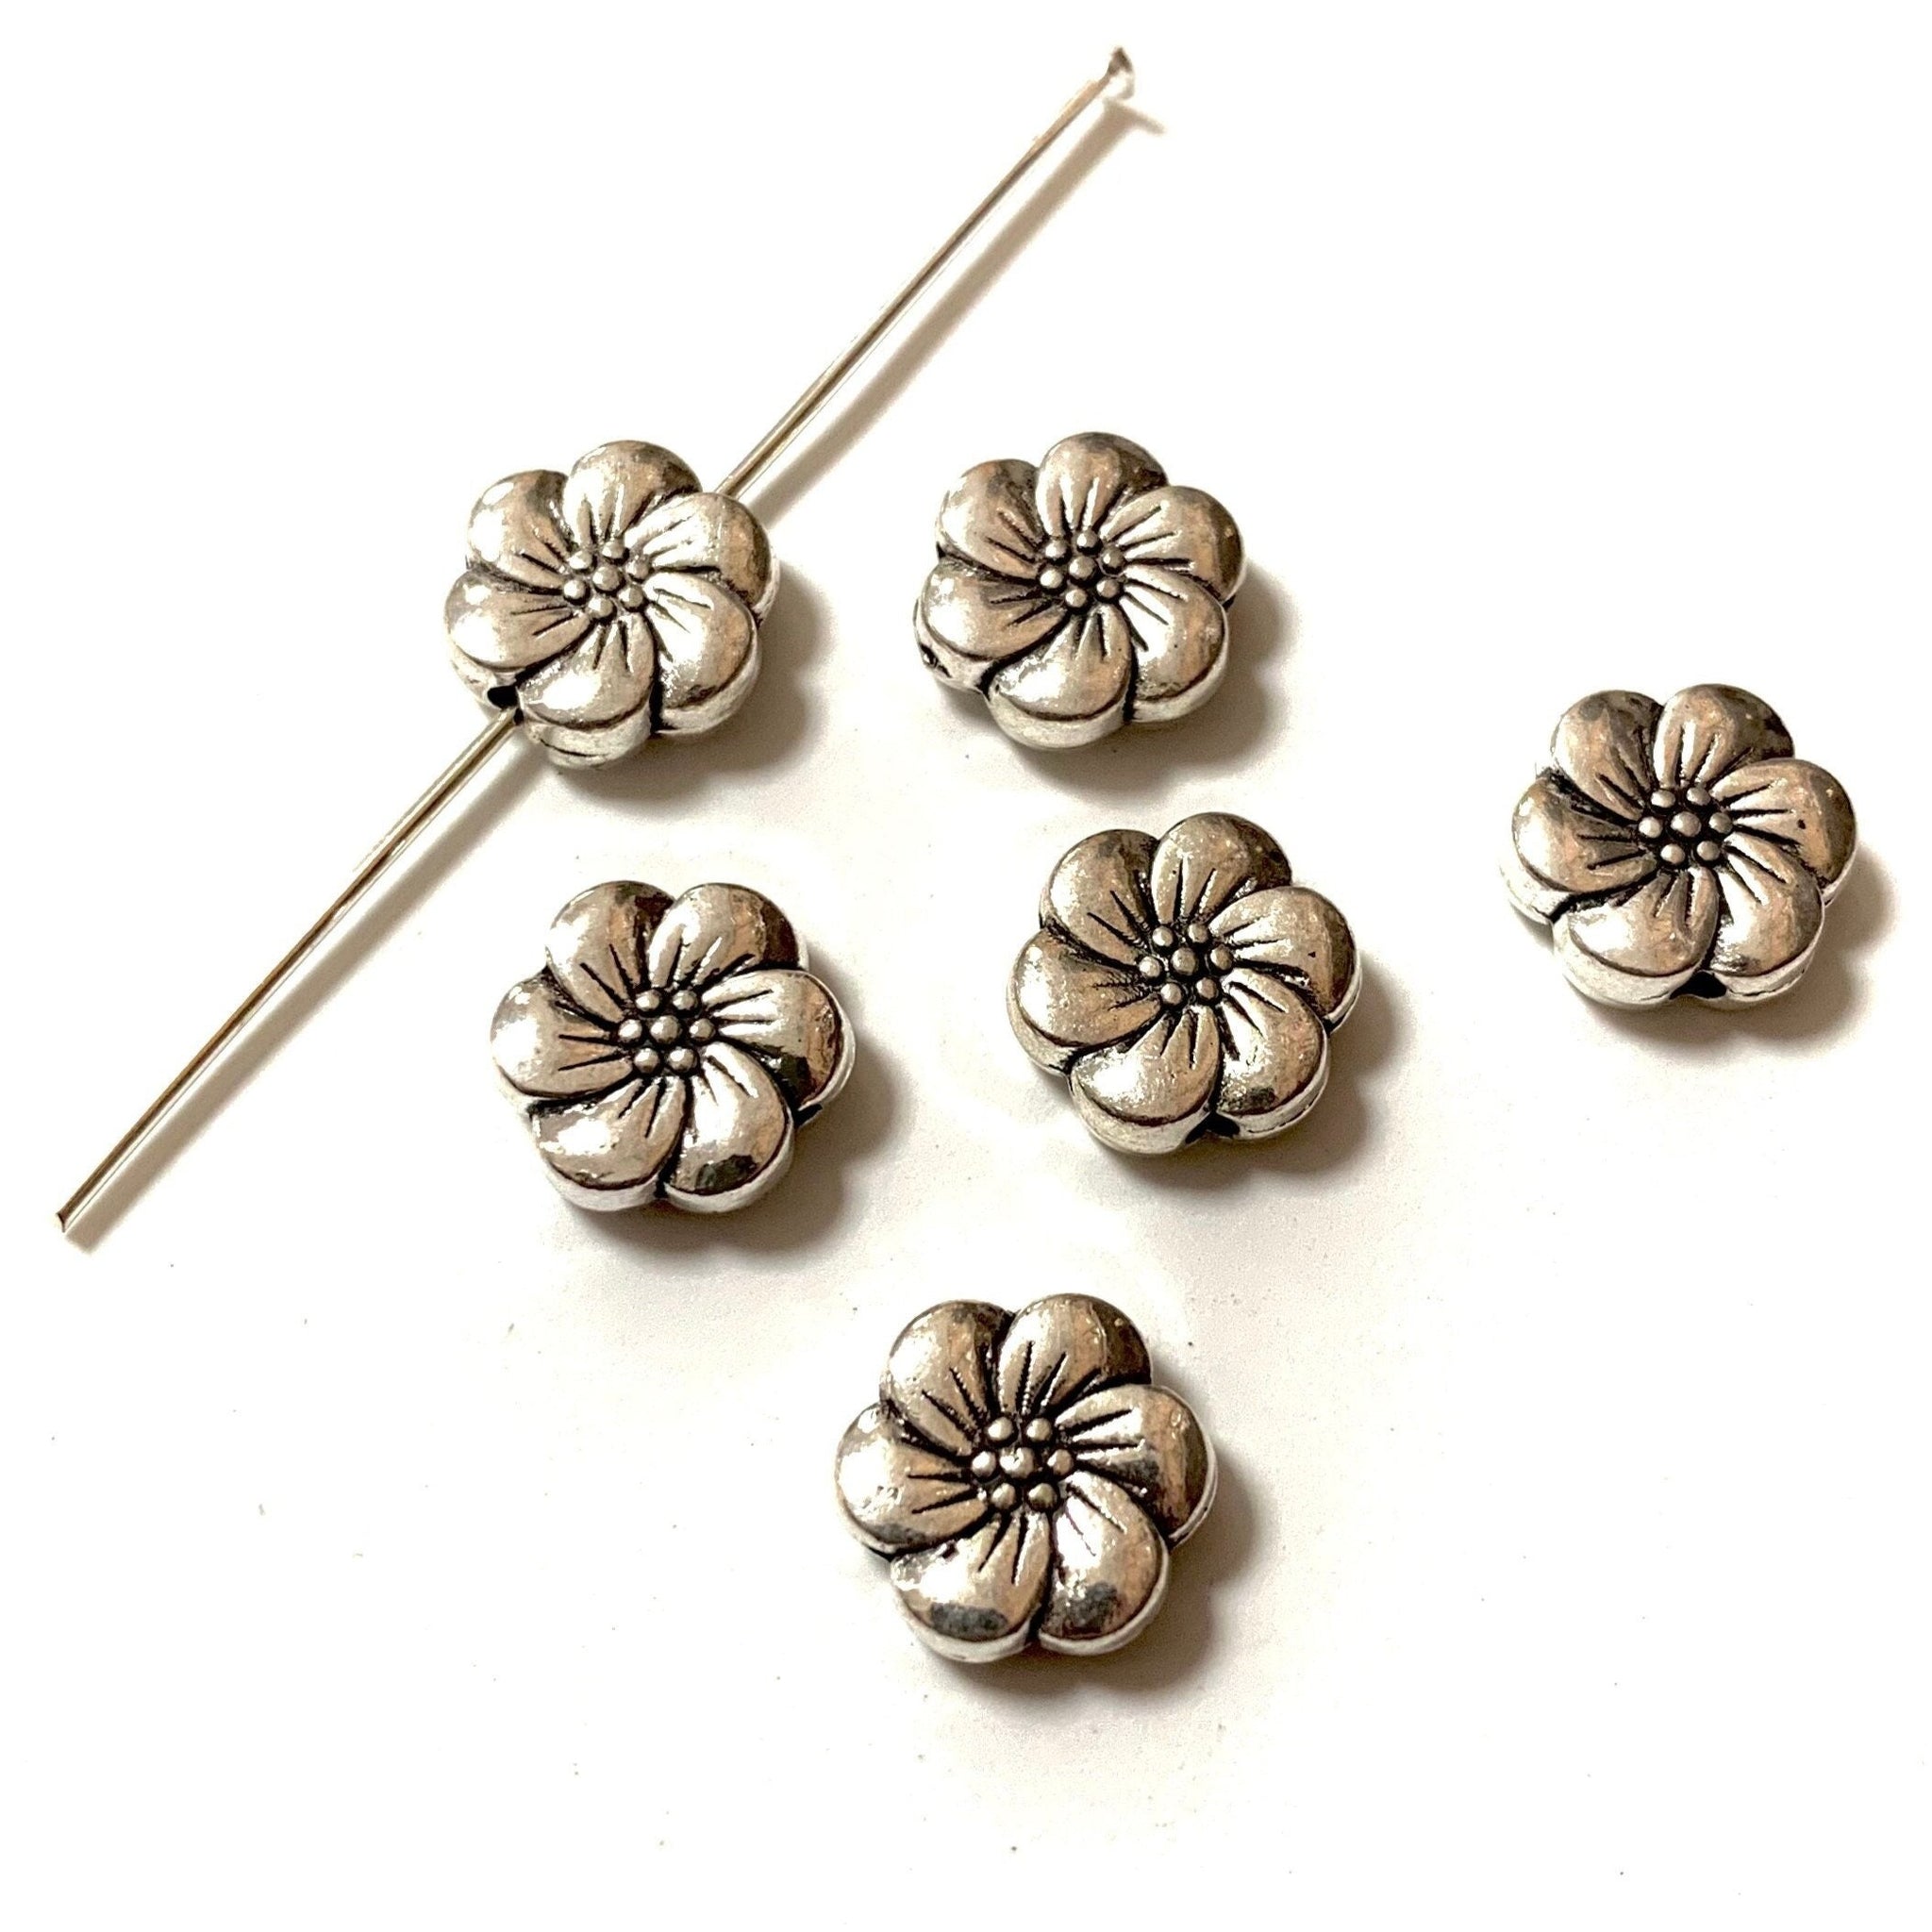 10 Flower Spacer Beads - Double Sided - Antique Silver